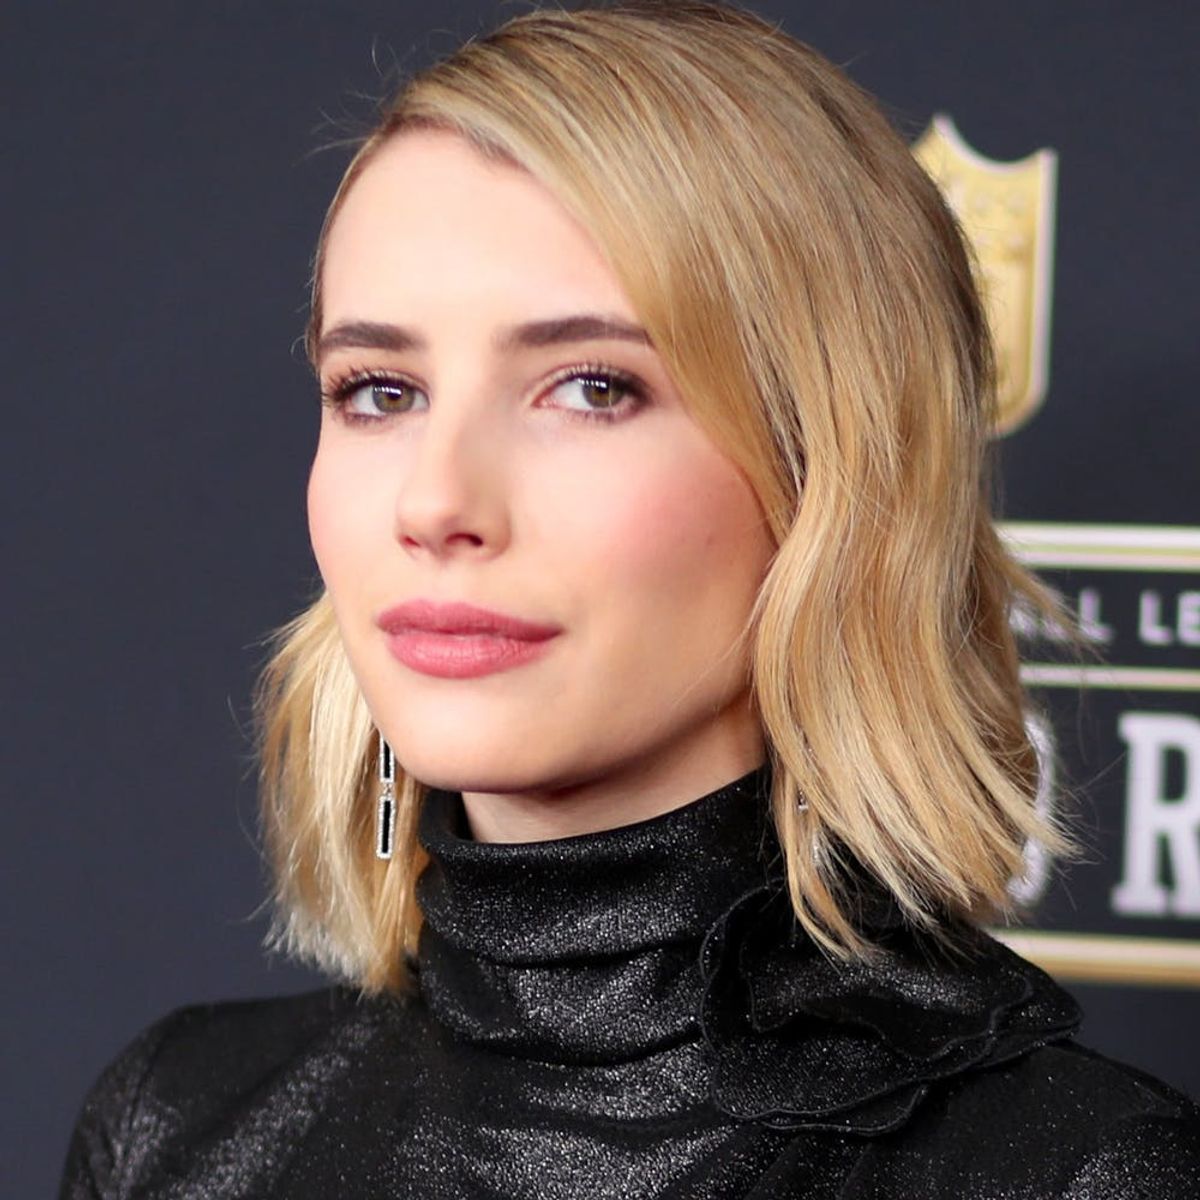 Emma Roberts Got a Good Luck Tattoo in the Most Risqué Place